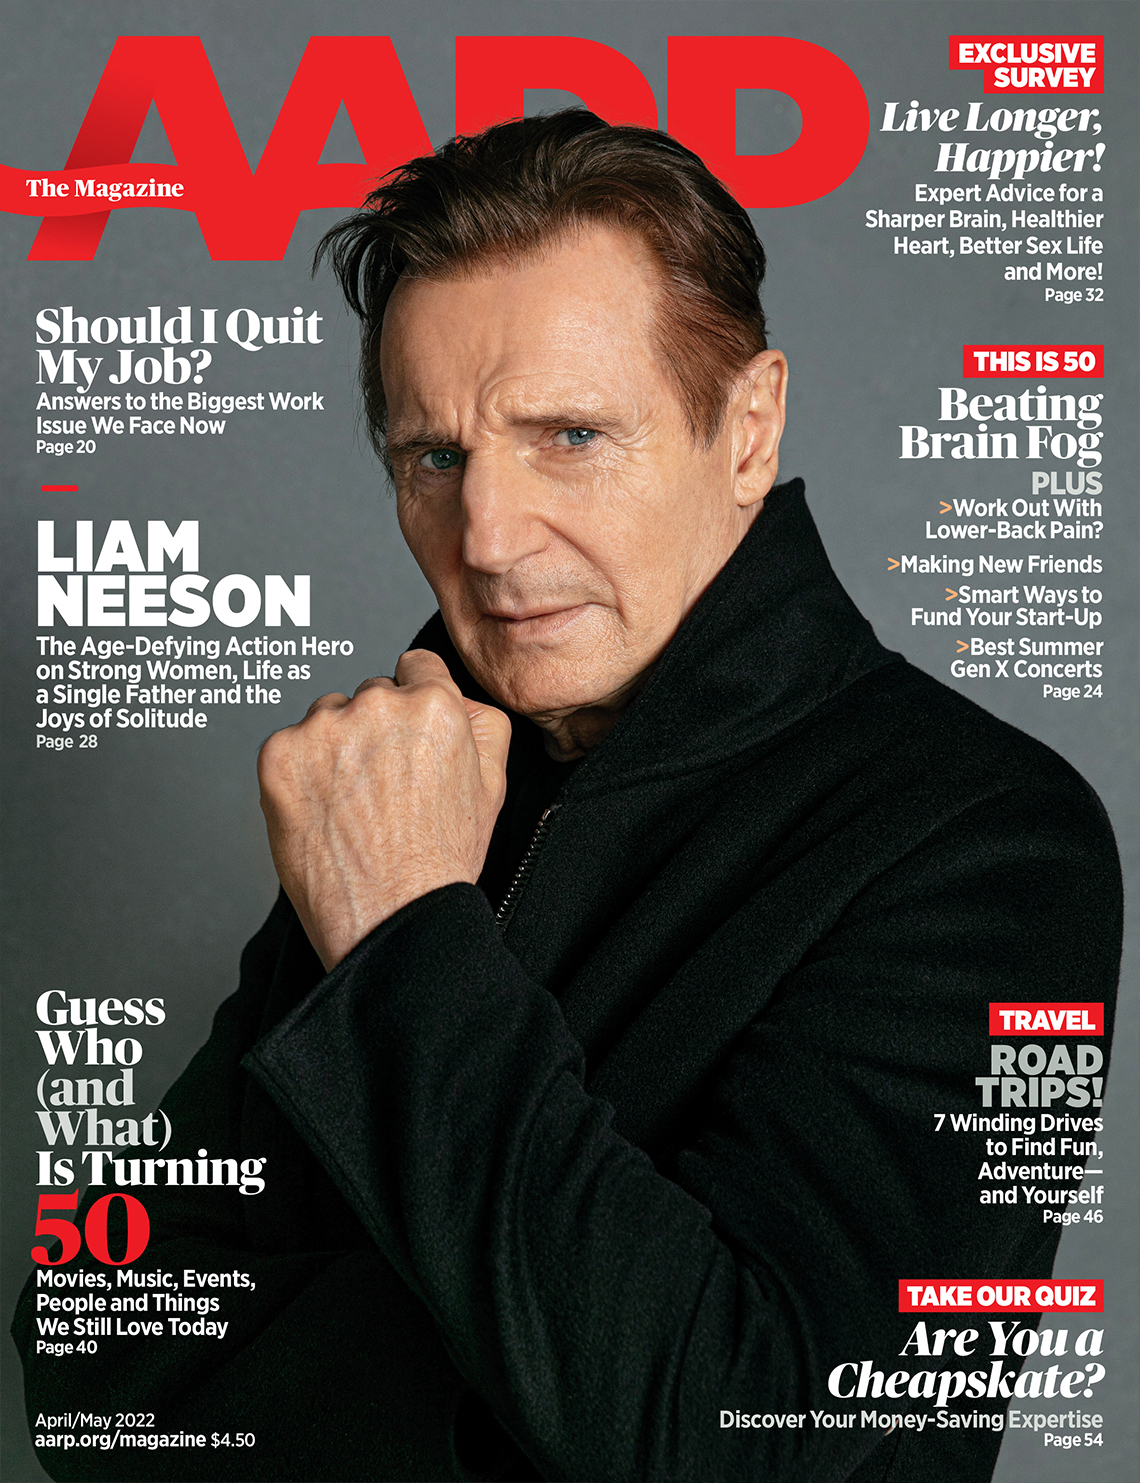 Liam Neeson, cover of AARP The Magazine April/May 2022 issue.